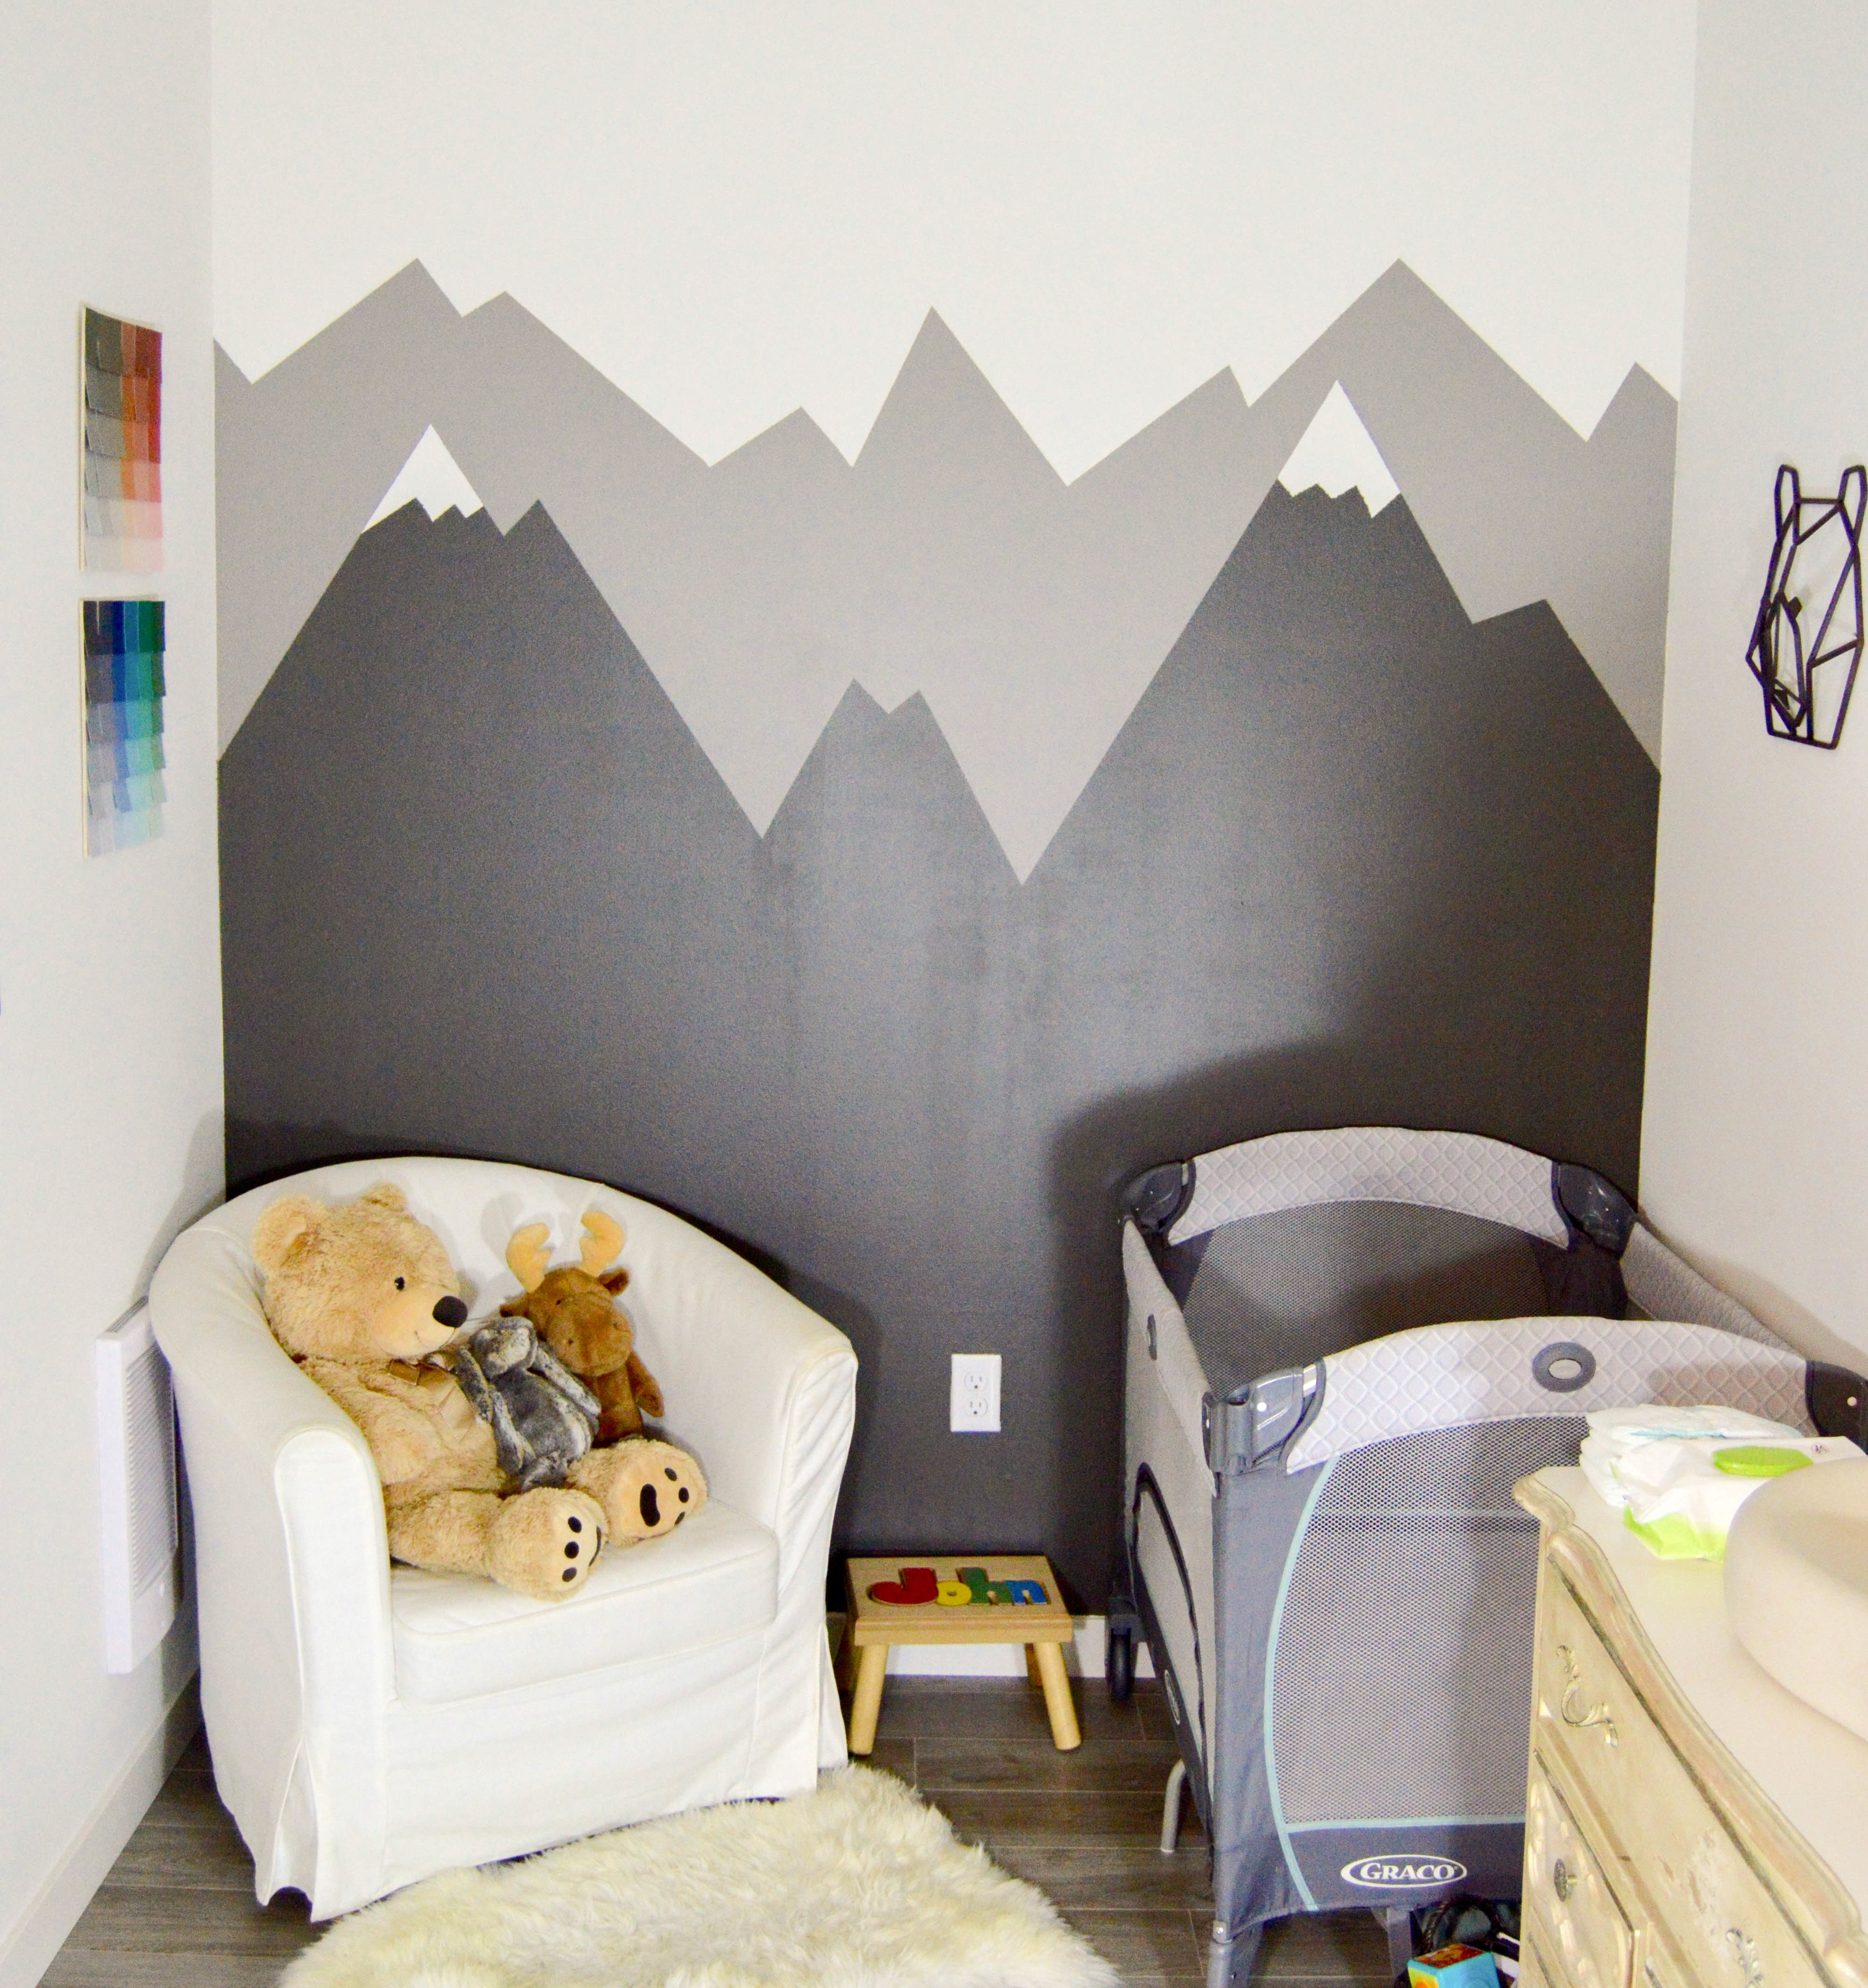 DIY Mountain Wall Mural - Small PNW (Pacific Northwest) outdoor theme nursery with mountains + animals for our baby boy. Mountain mural and paint chip art tutorial for woodland feel.